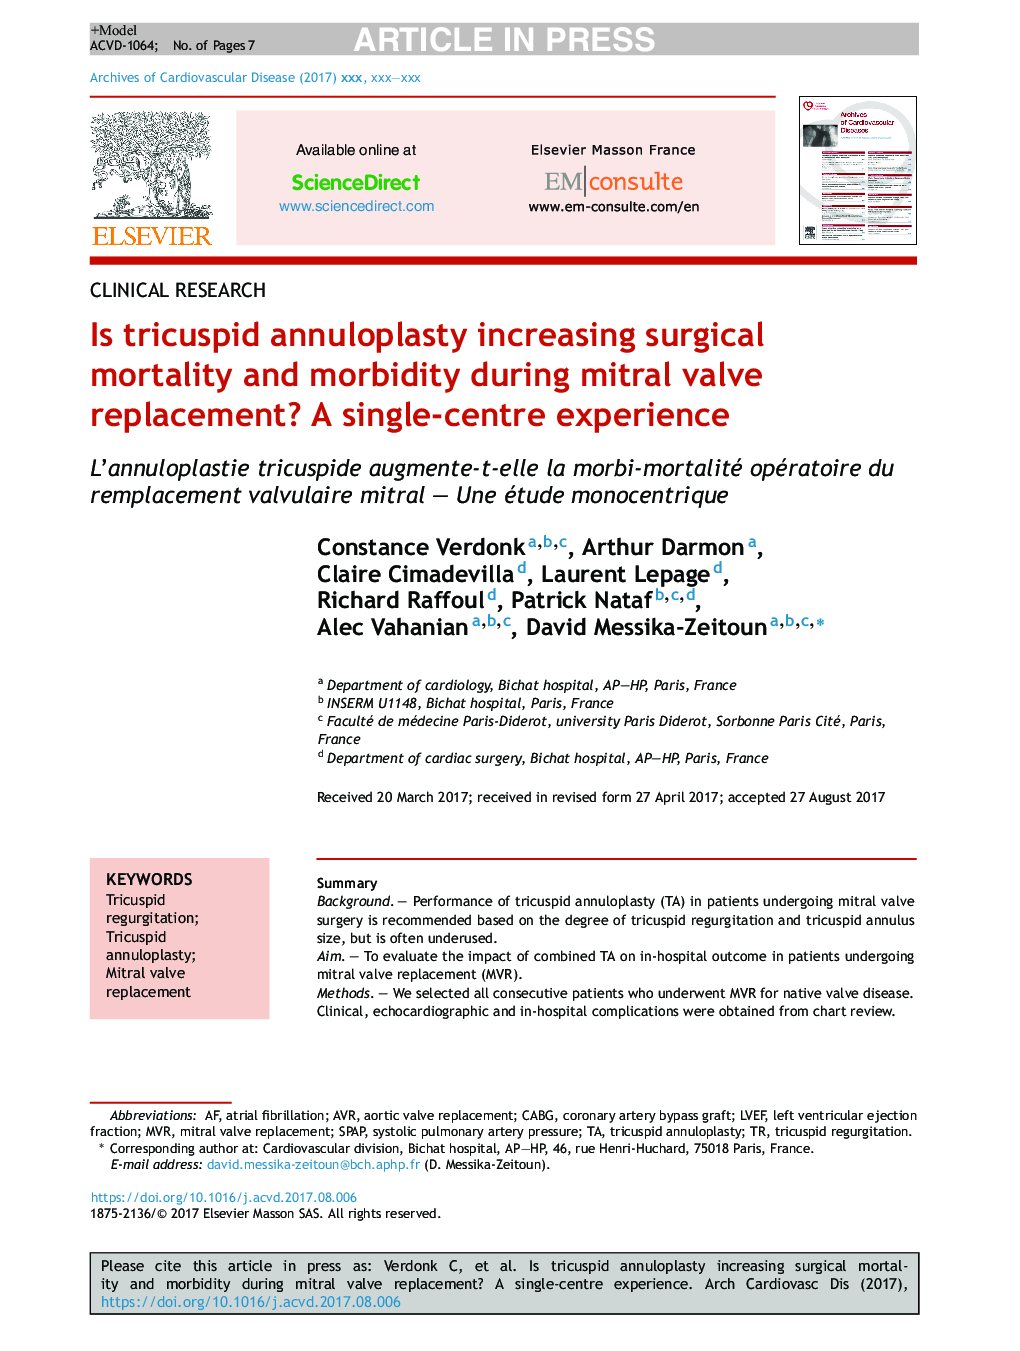 Is tricuspid annuloplasty increasing surgical mortality and morbidity during mitral valve replacement? A single-centre experience